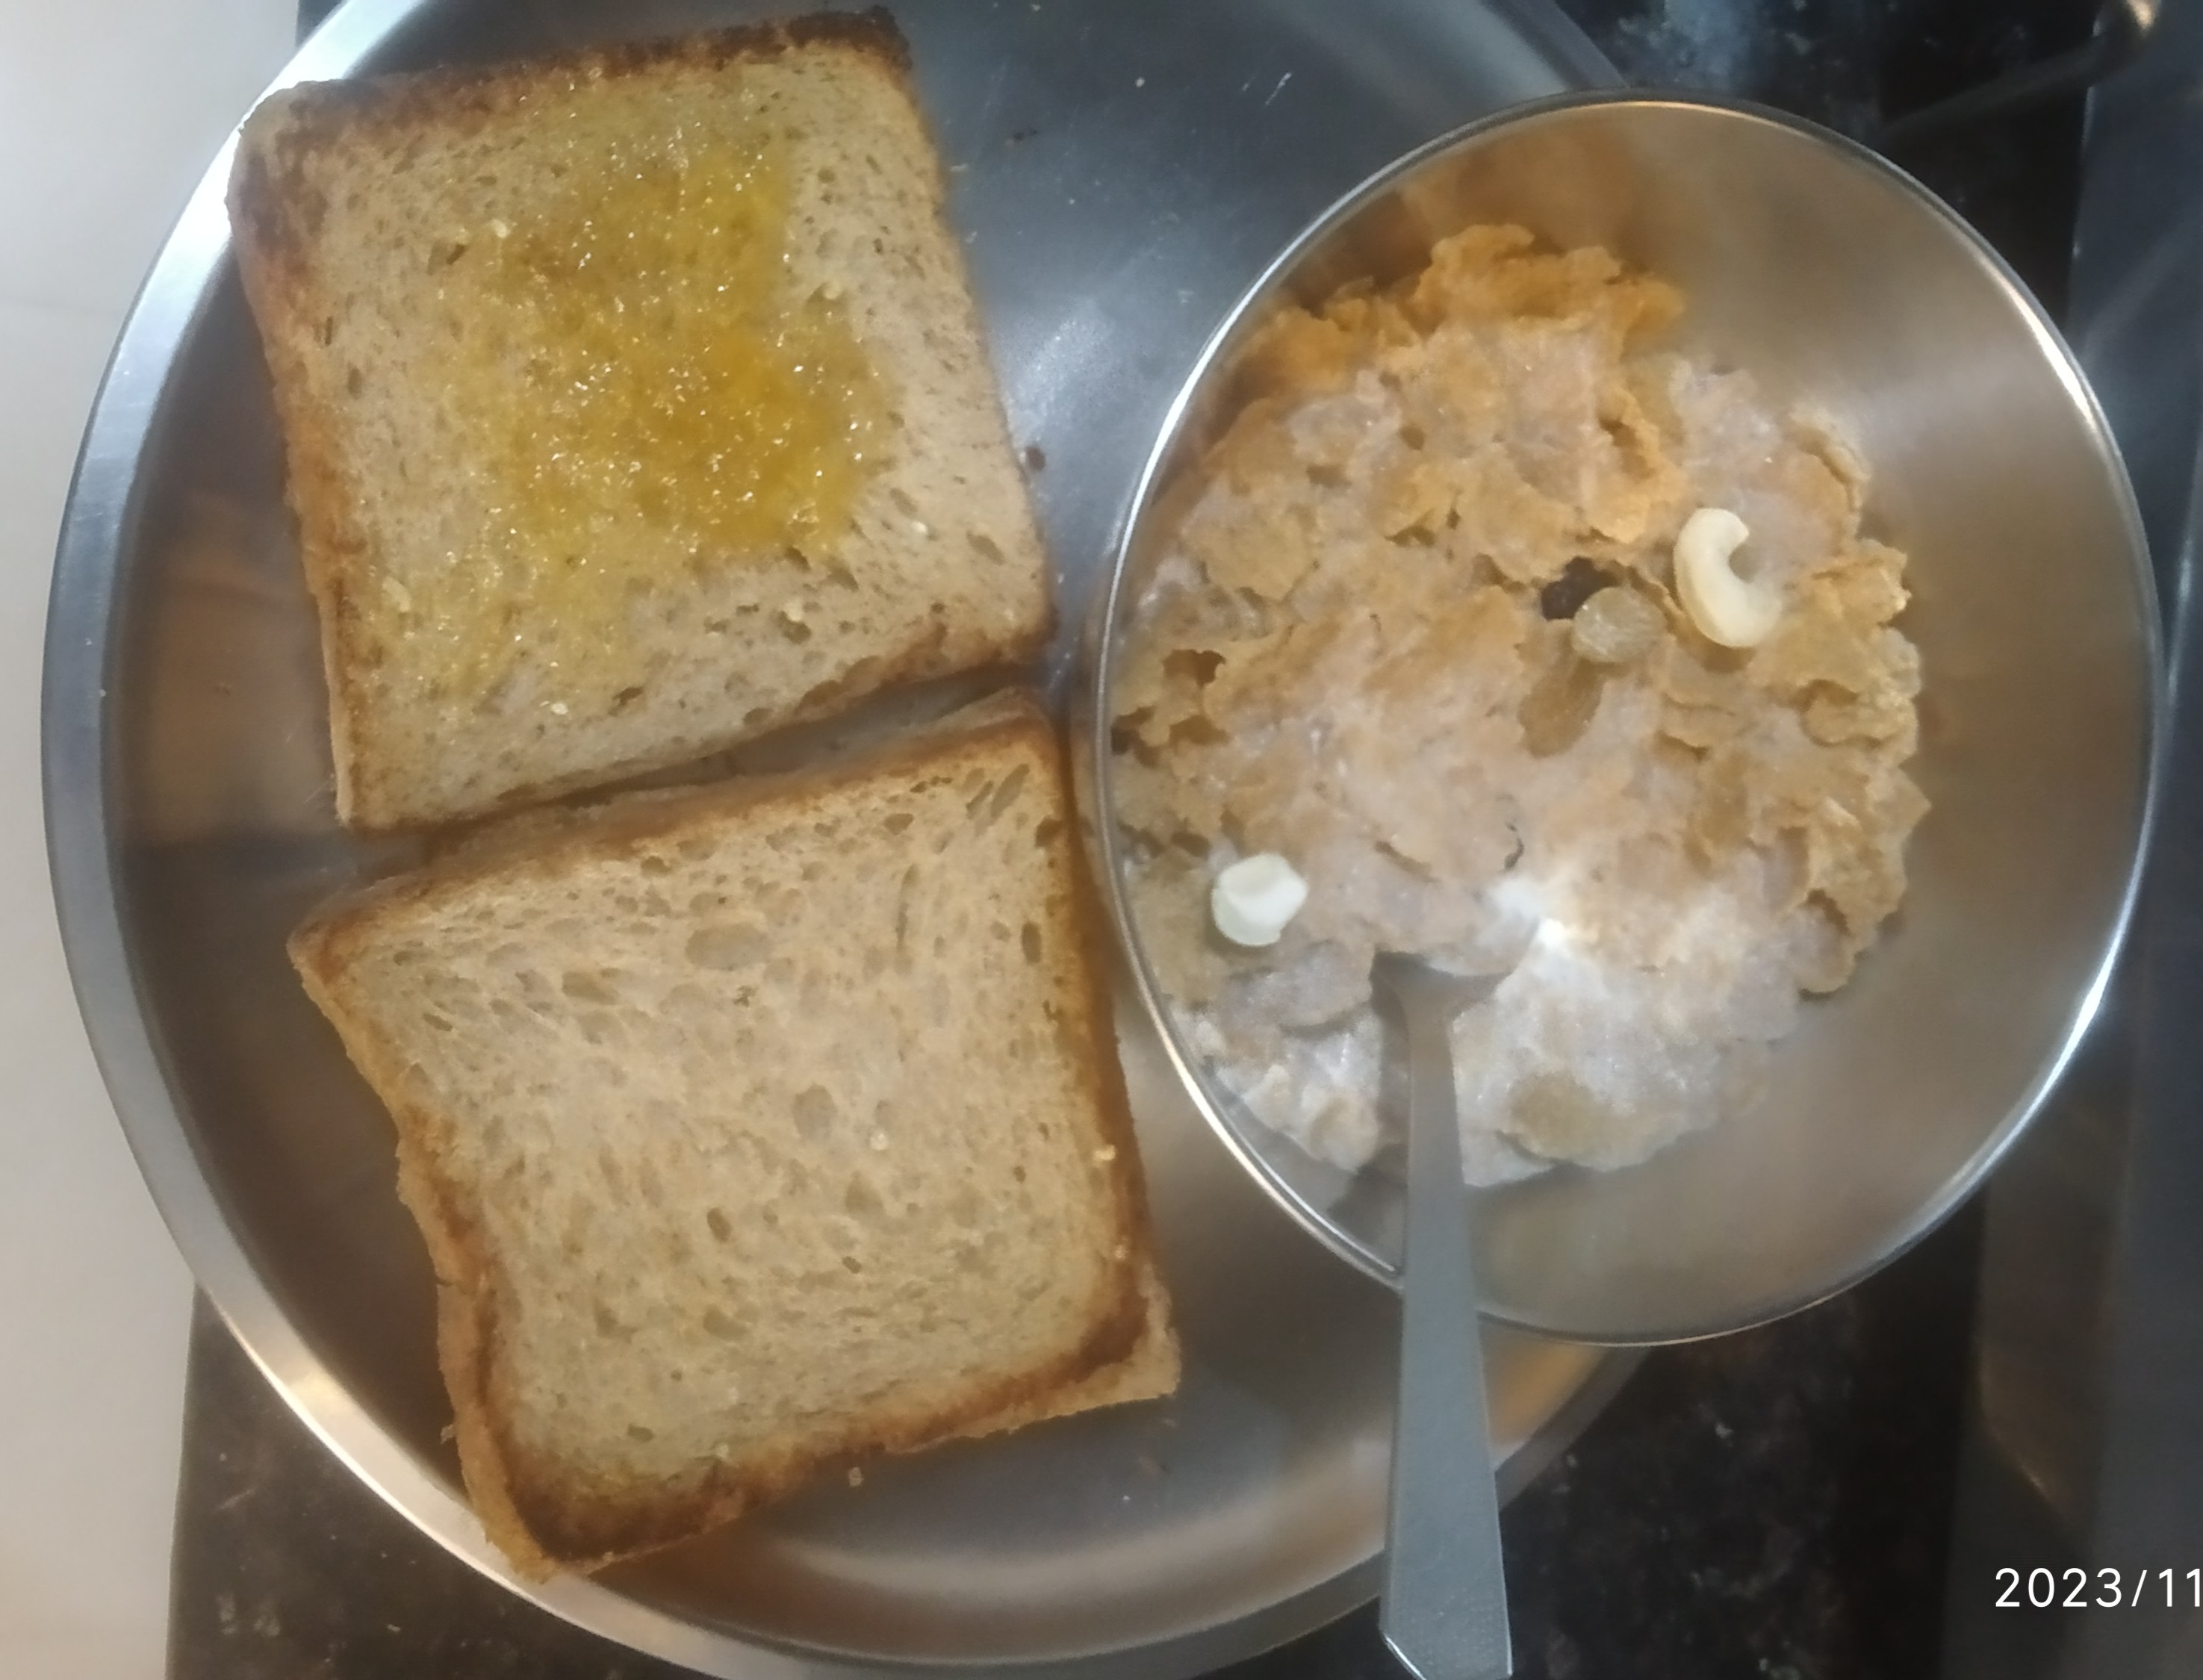 Bread and Wheat Flakes